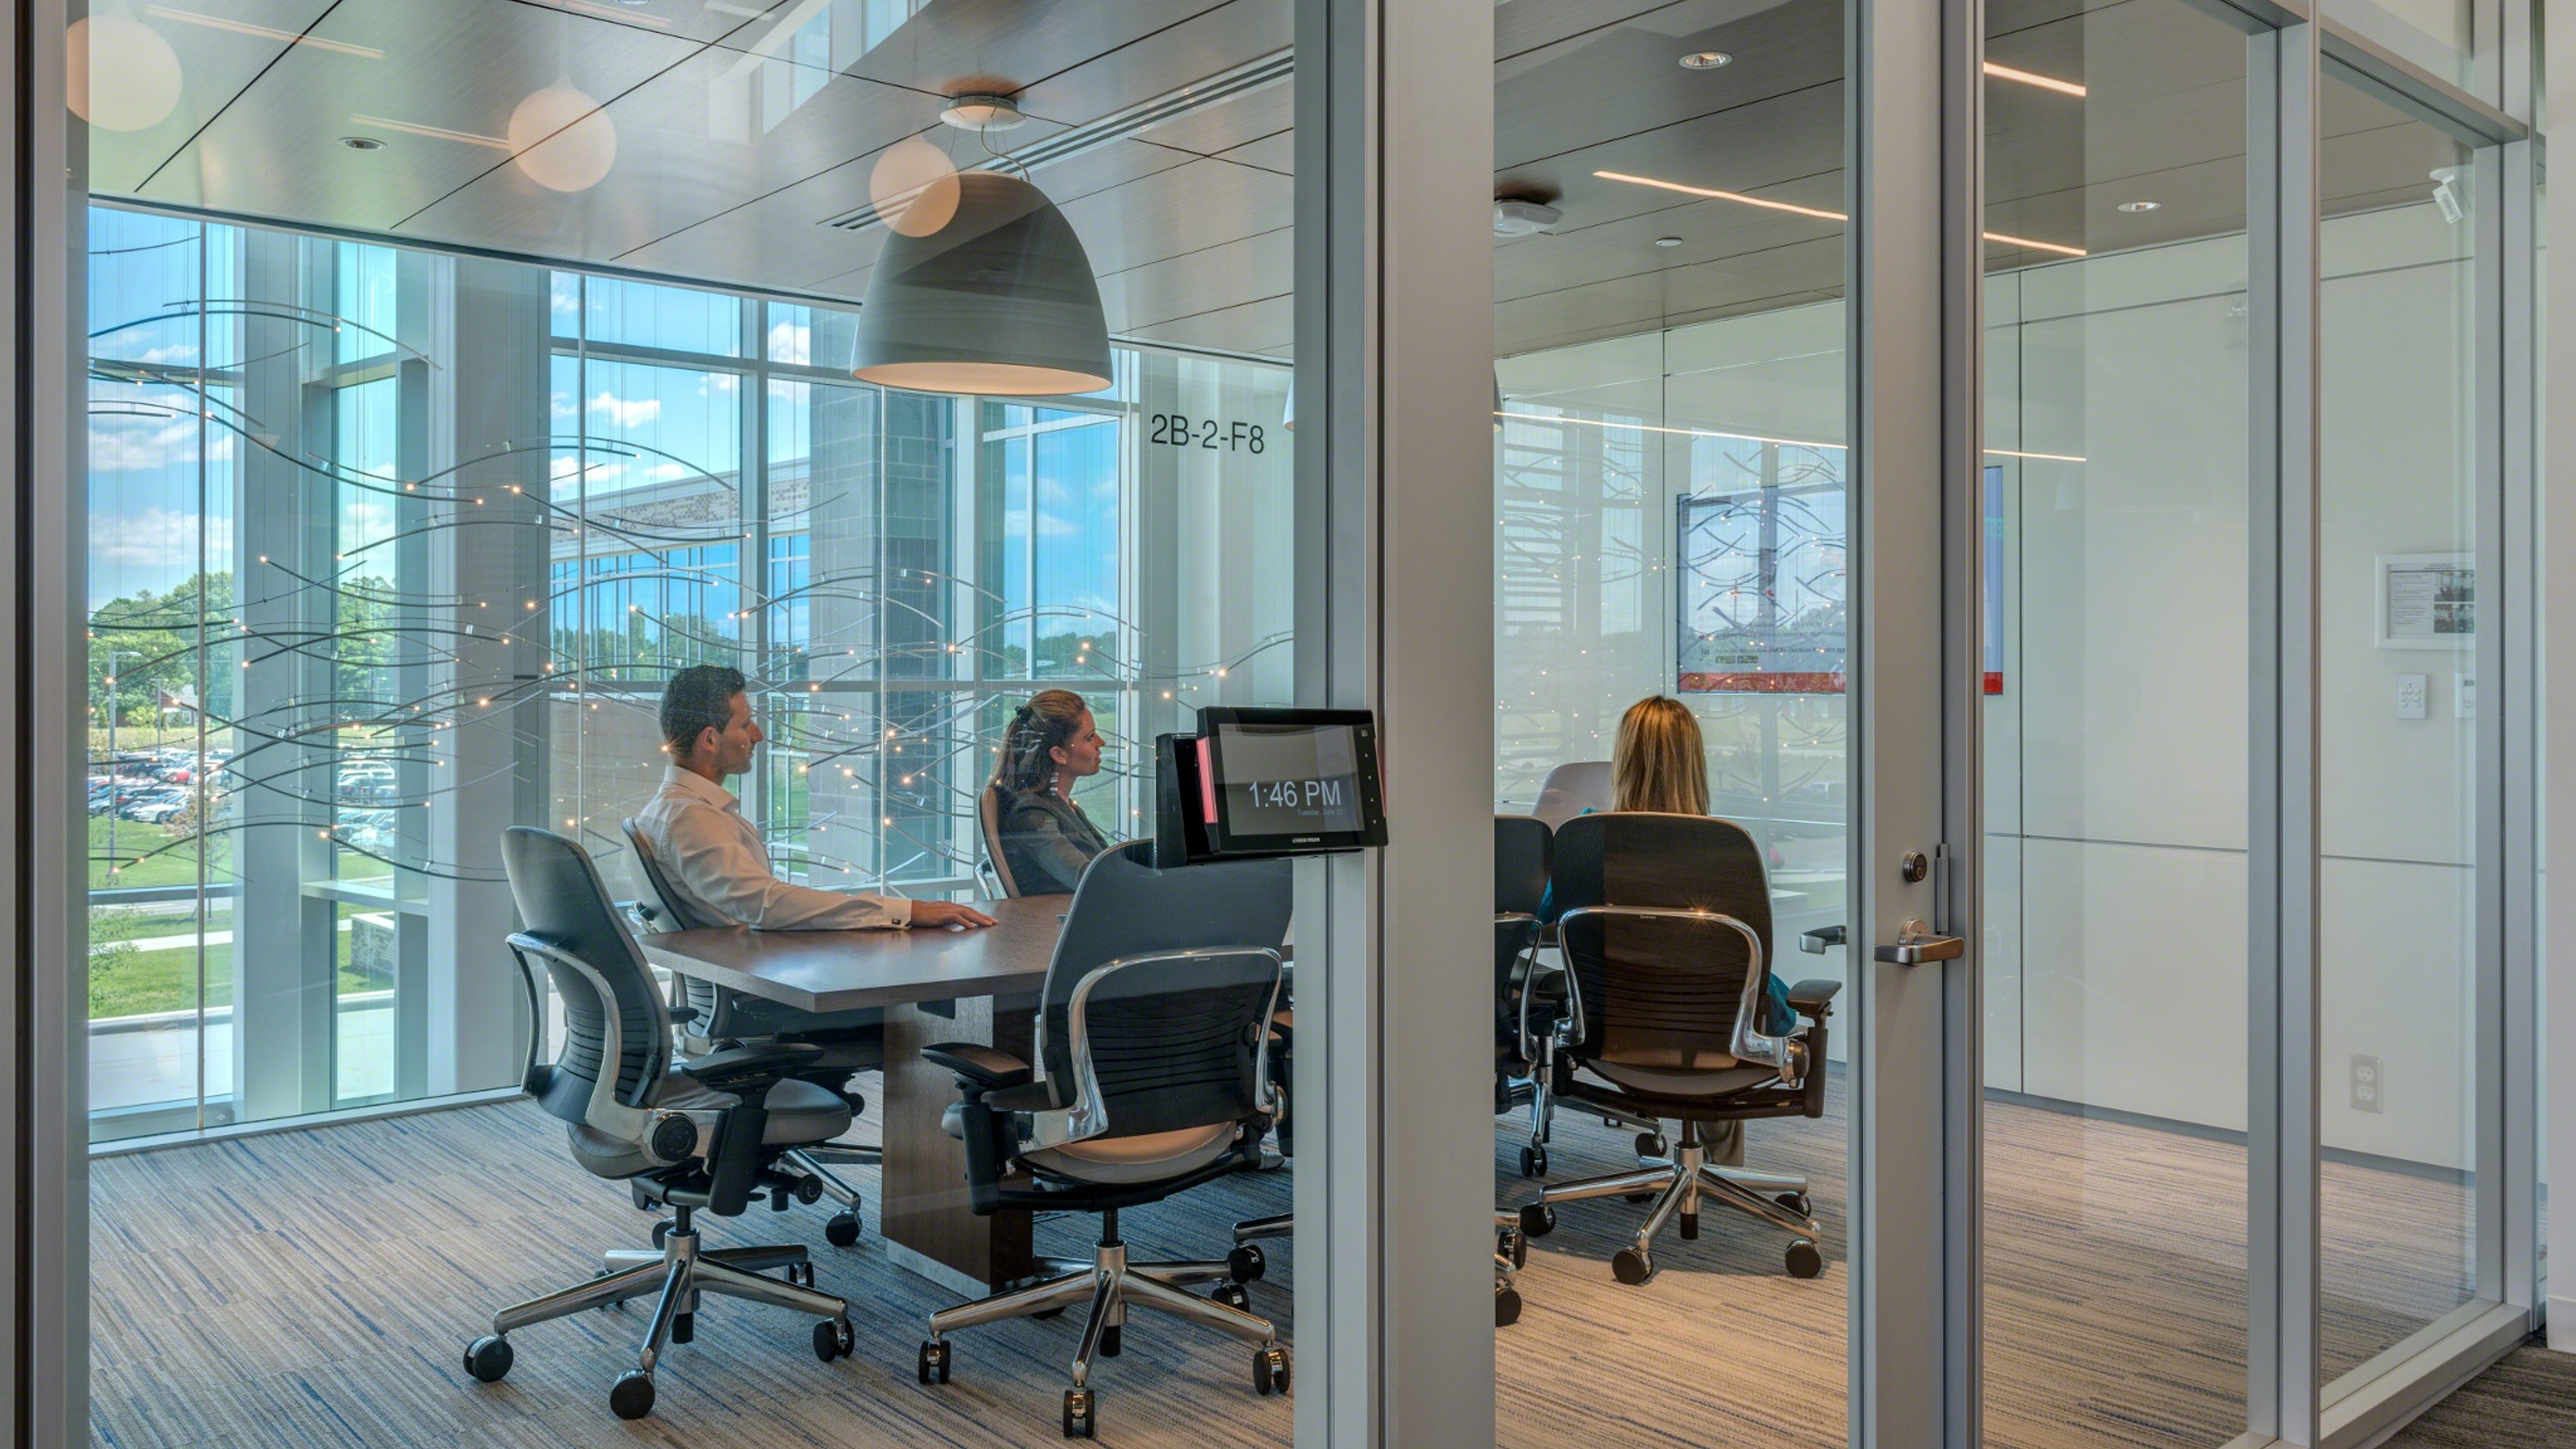 3 persons inside a meeting room with glass walls, screen on a white wall, room wizard.